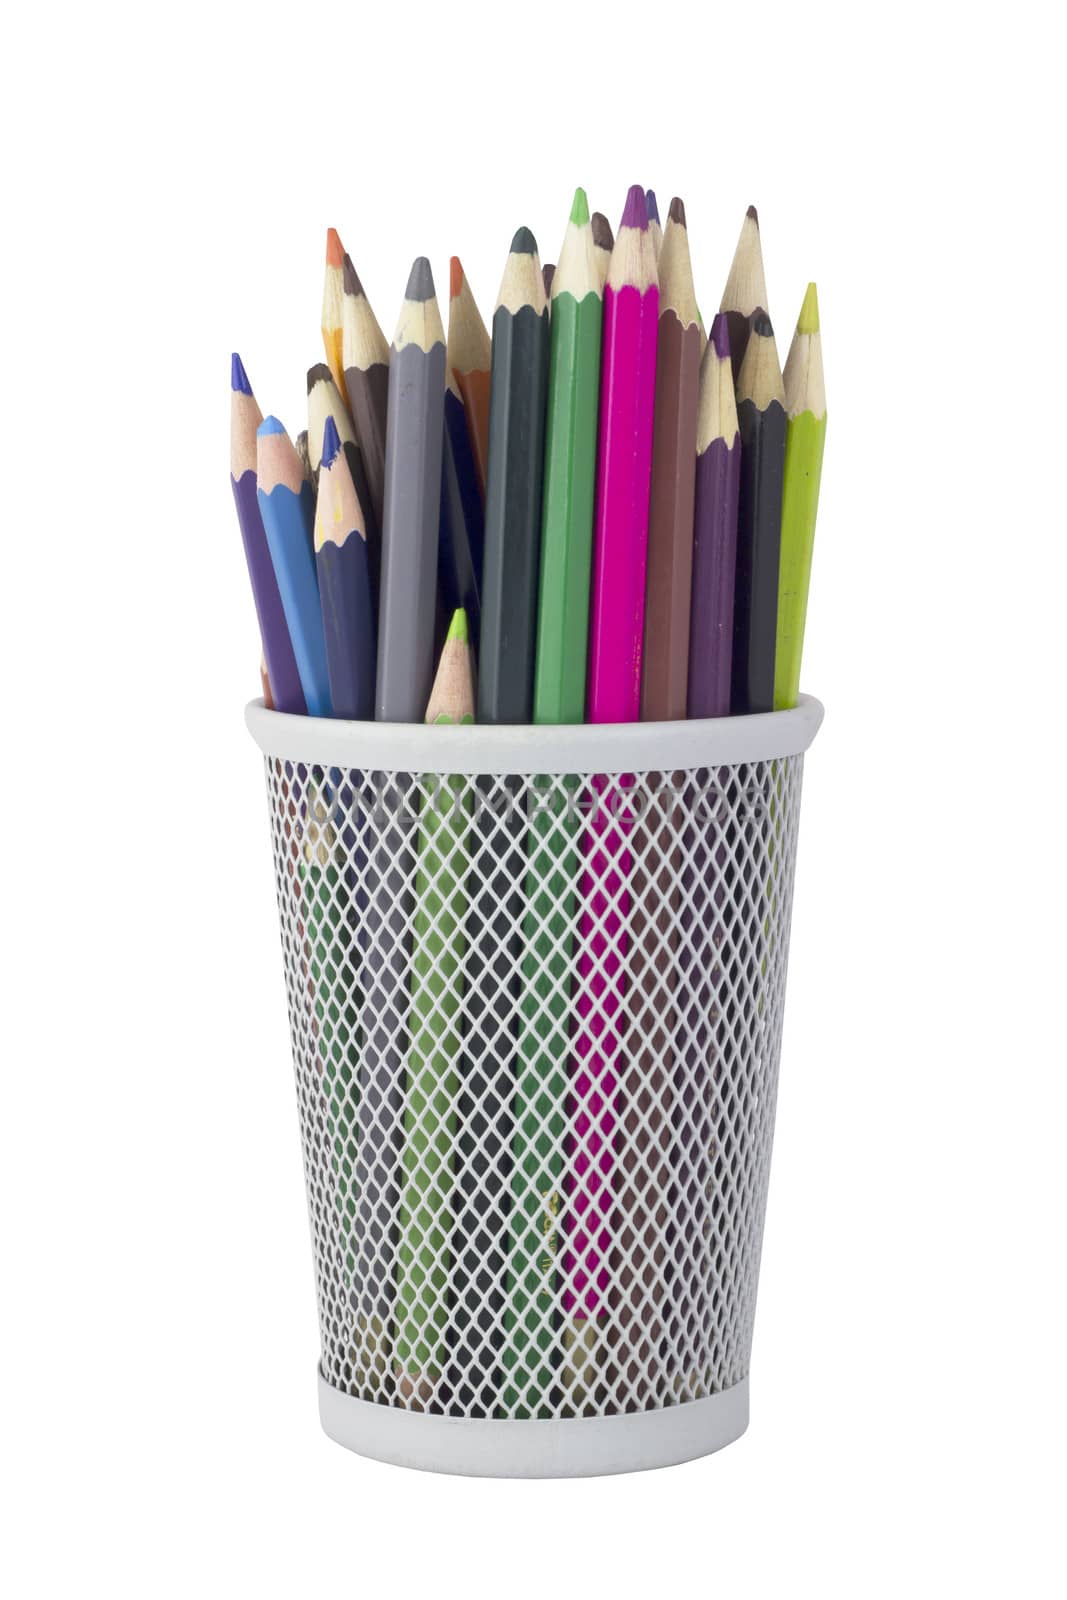 Pencils in a pencil cup by cherezoff